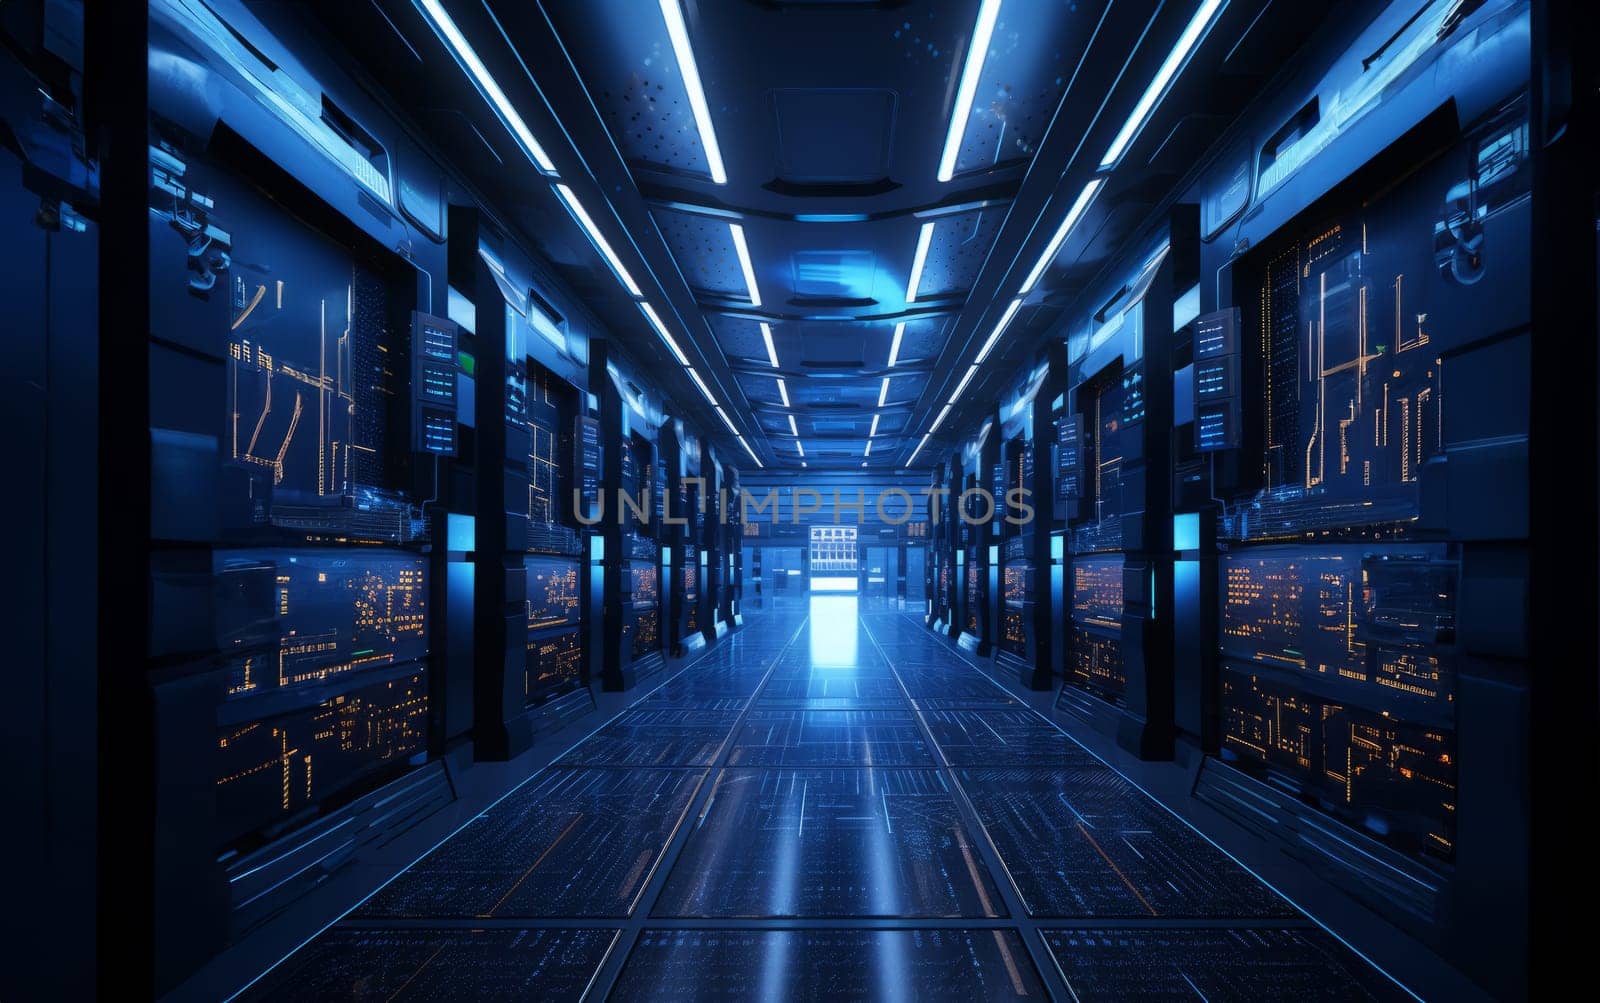 A modern server room, where data is stored and processed to power the digital world.